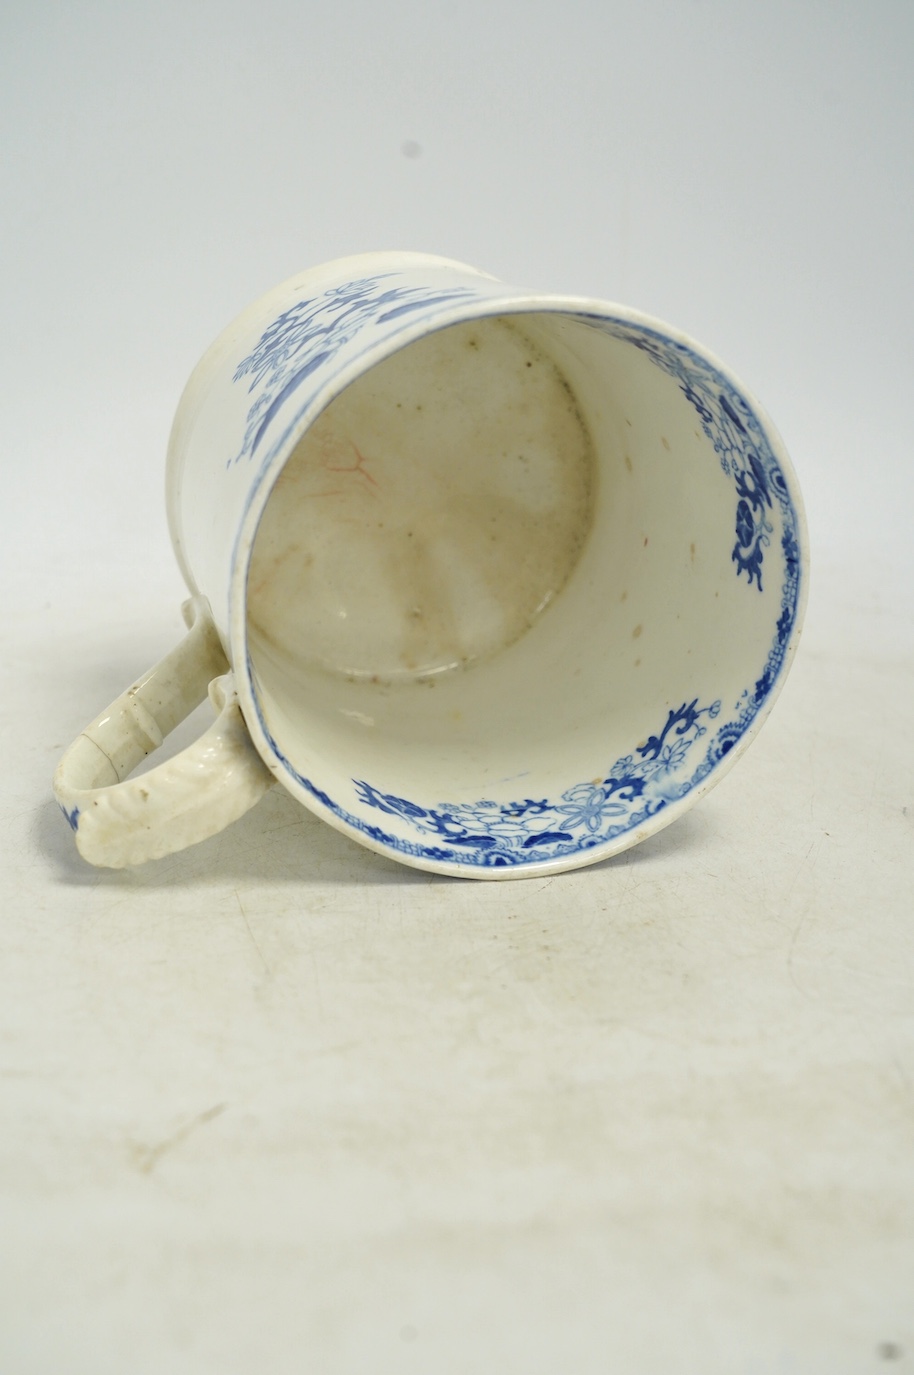 An early Victorian blue and white bone china mug, 13cm high. Condition - fair, crack to the handle